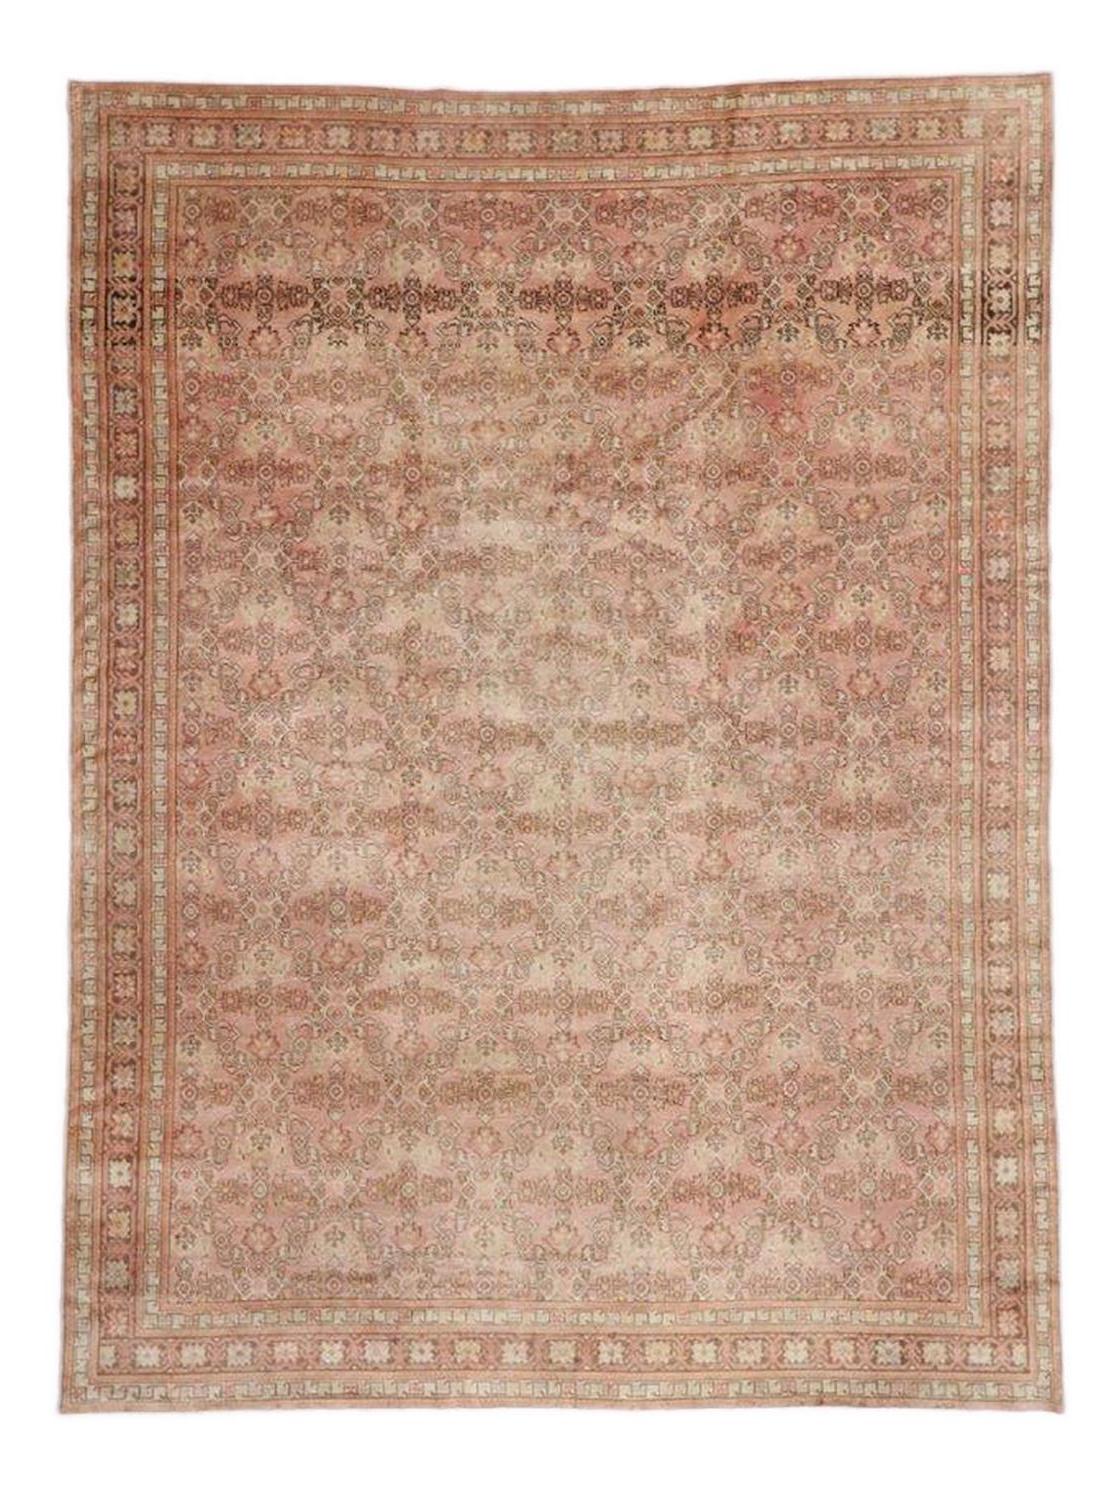 52289 Vintage Turkish Oushak Area Rug with French Provincial Style 09'08 x 13'00.  Warm and welcoming, this hand-knotted wool vintage Turkish Oushak area rug charms with ease. It features a lively all-over geometric floral lattice pattern composed